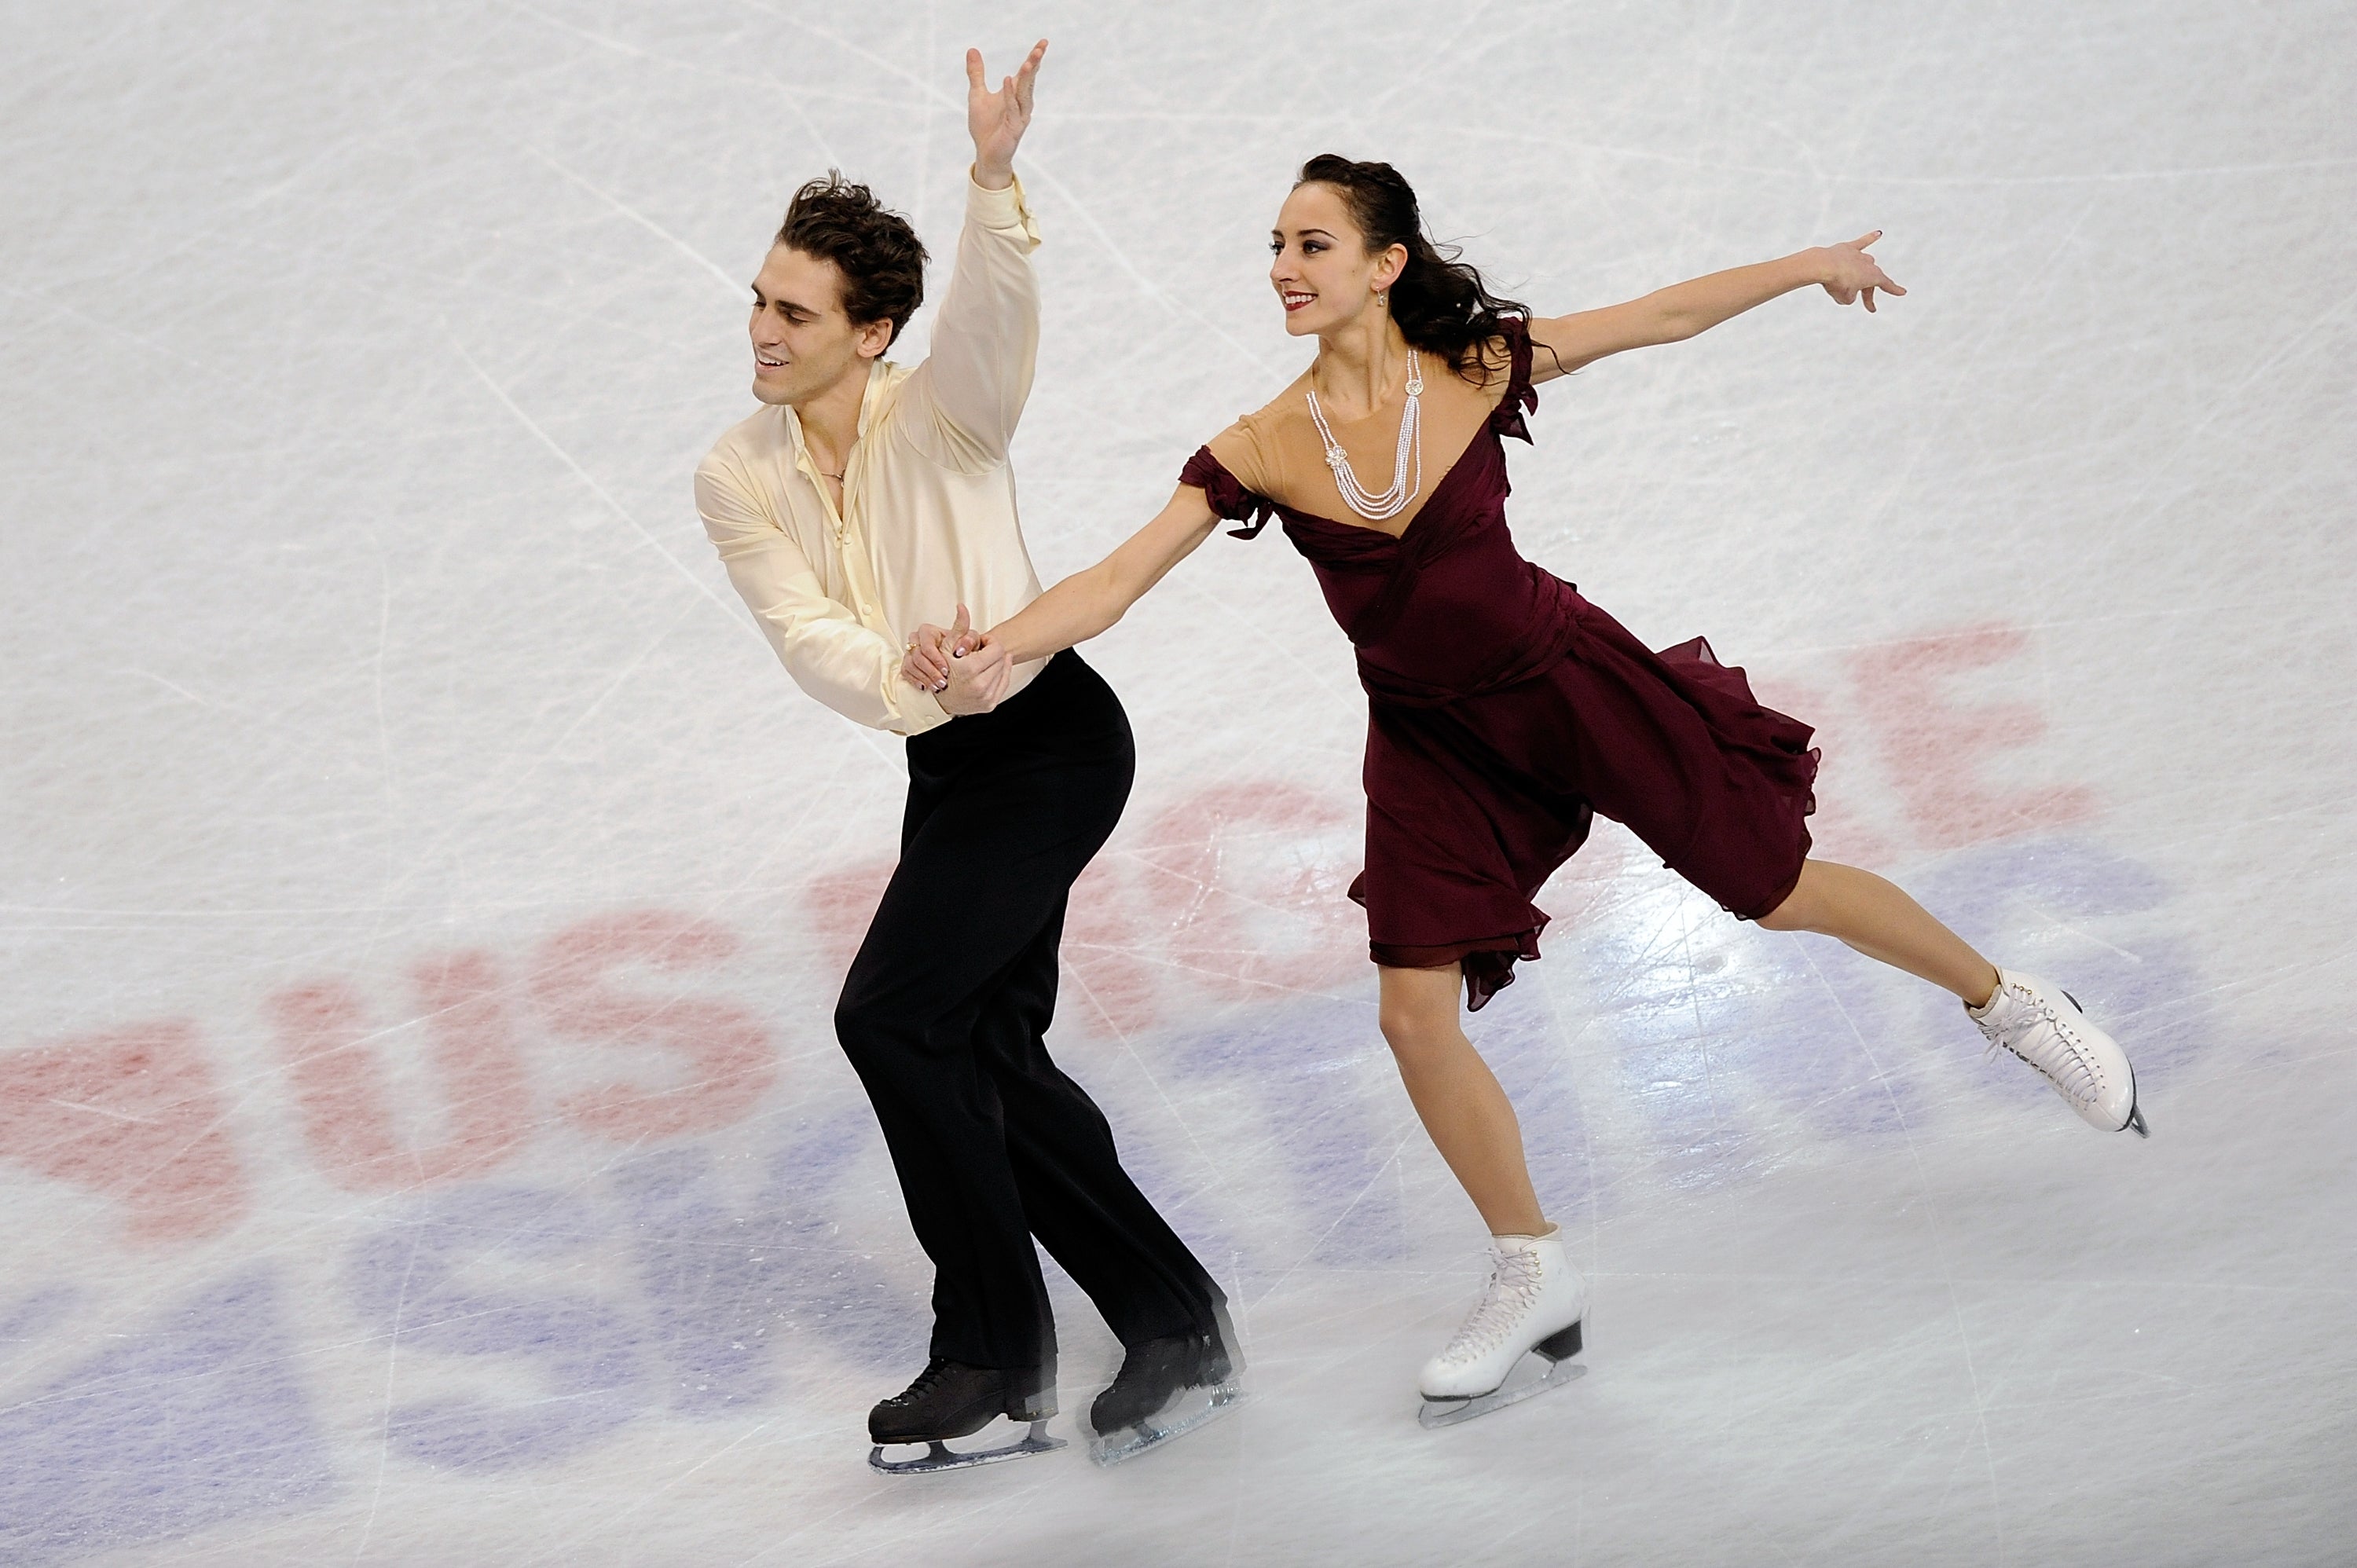 Anastasia Olson, who has been seriously hurt, and Ian Lorello in competition in 2015